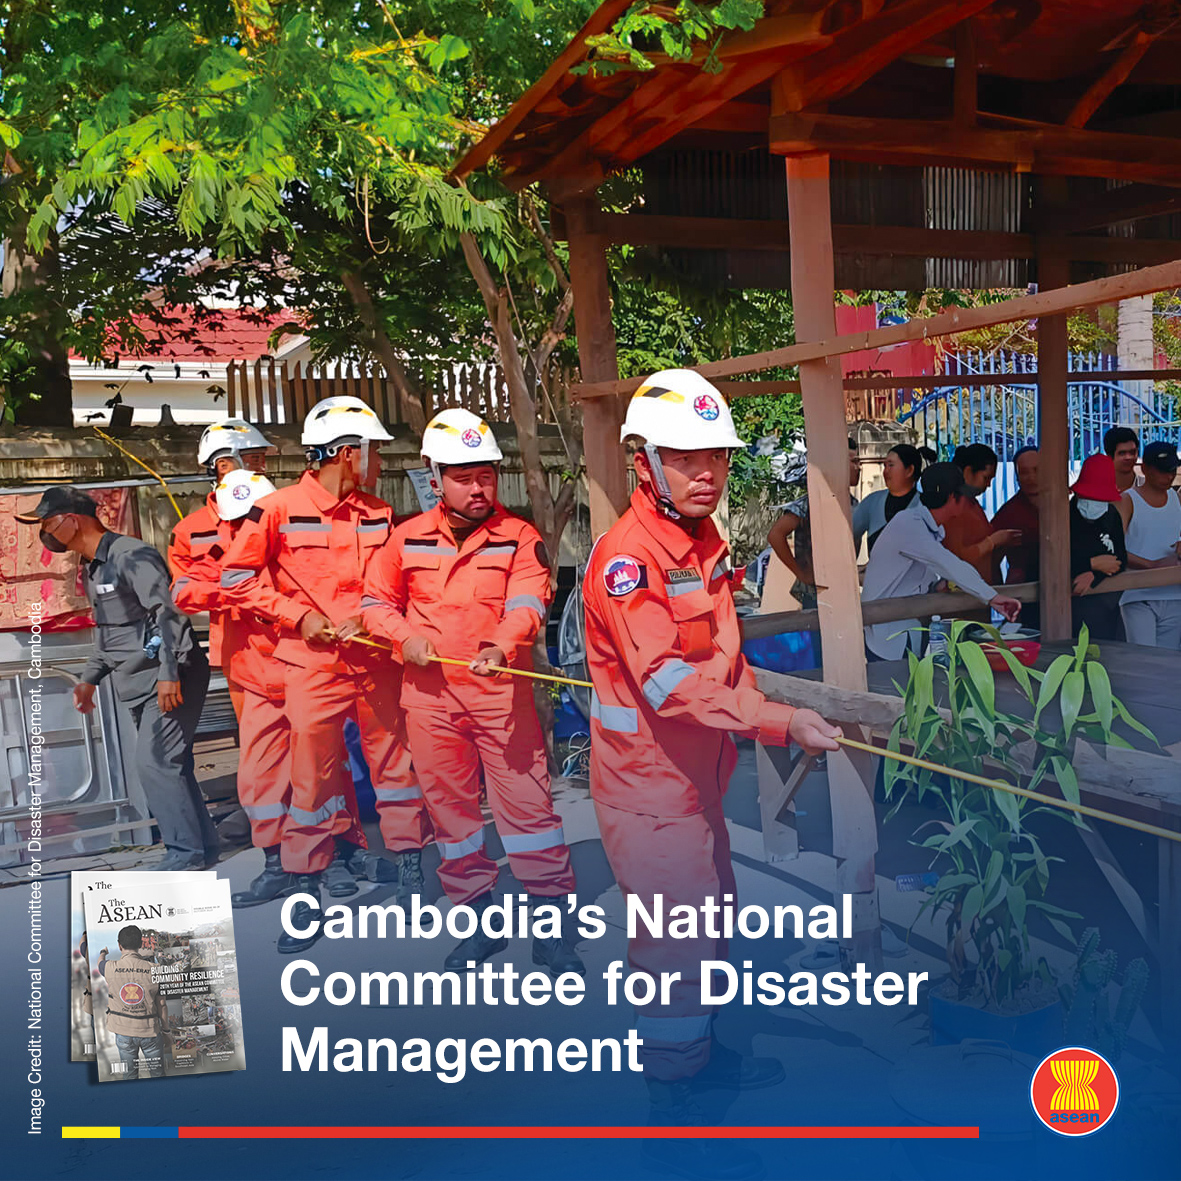 Through collaboration with international partners, various studies, and community-focused initiatives, Cambodia is taking significant steps to safeguard its people and infrastructure in the face of climate change. Learn more, here: tinyurl.com/TheASEAN-NDMC-…